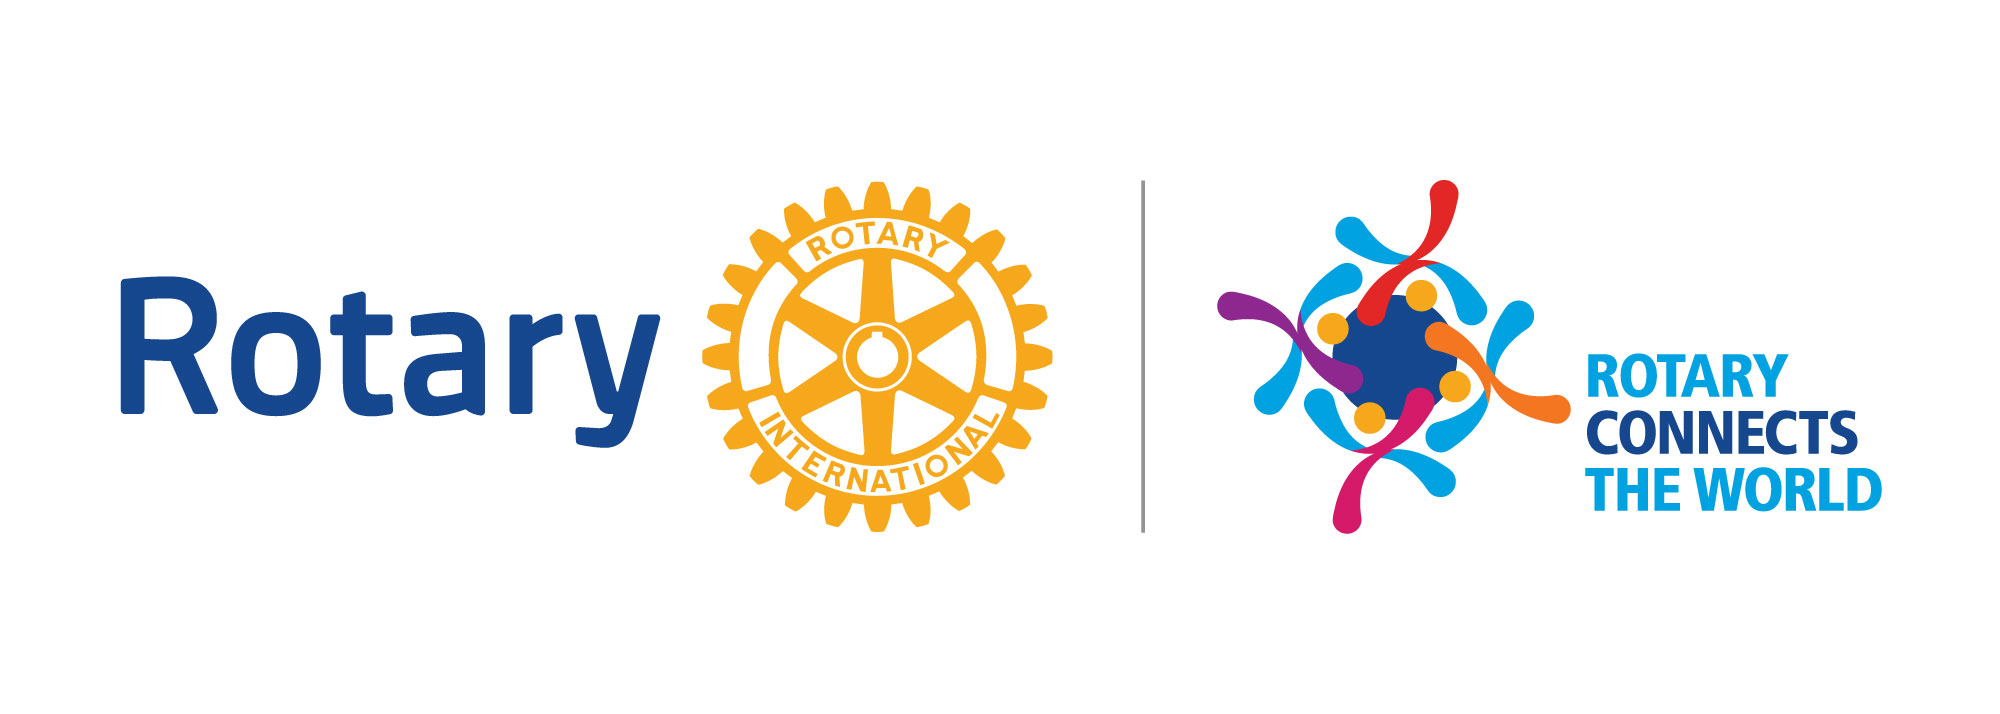 Rotary Logo: Rotary Connects the World